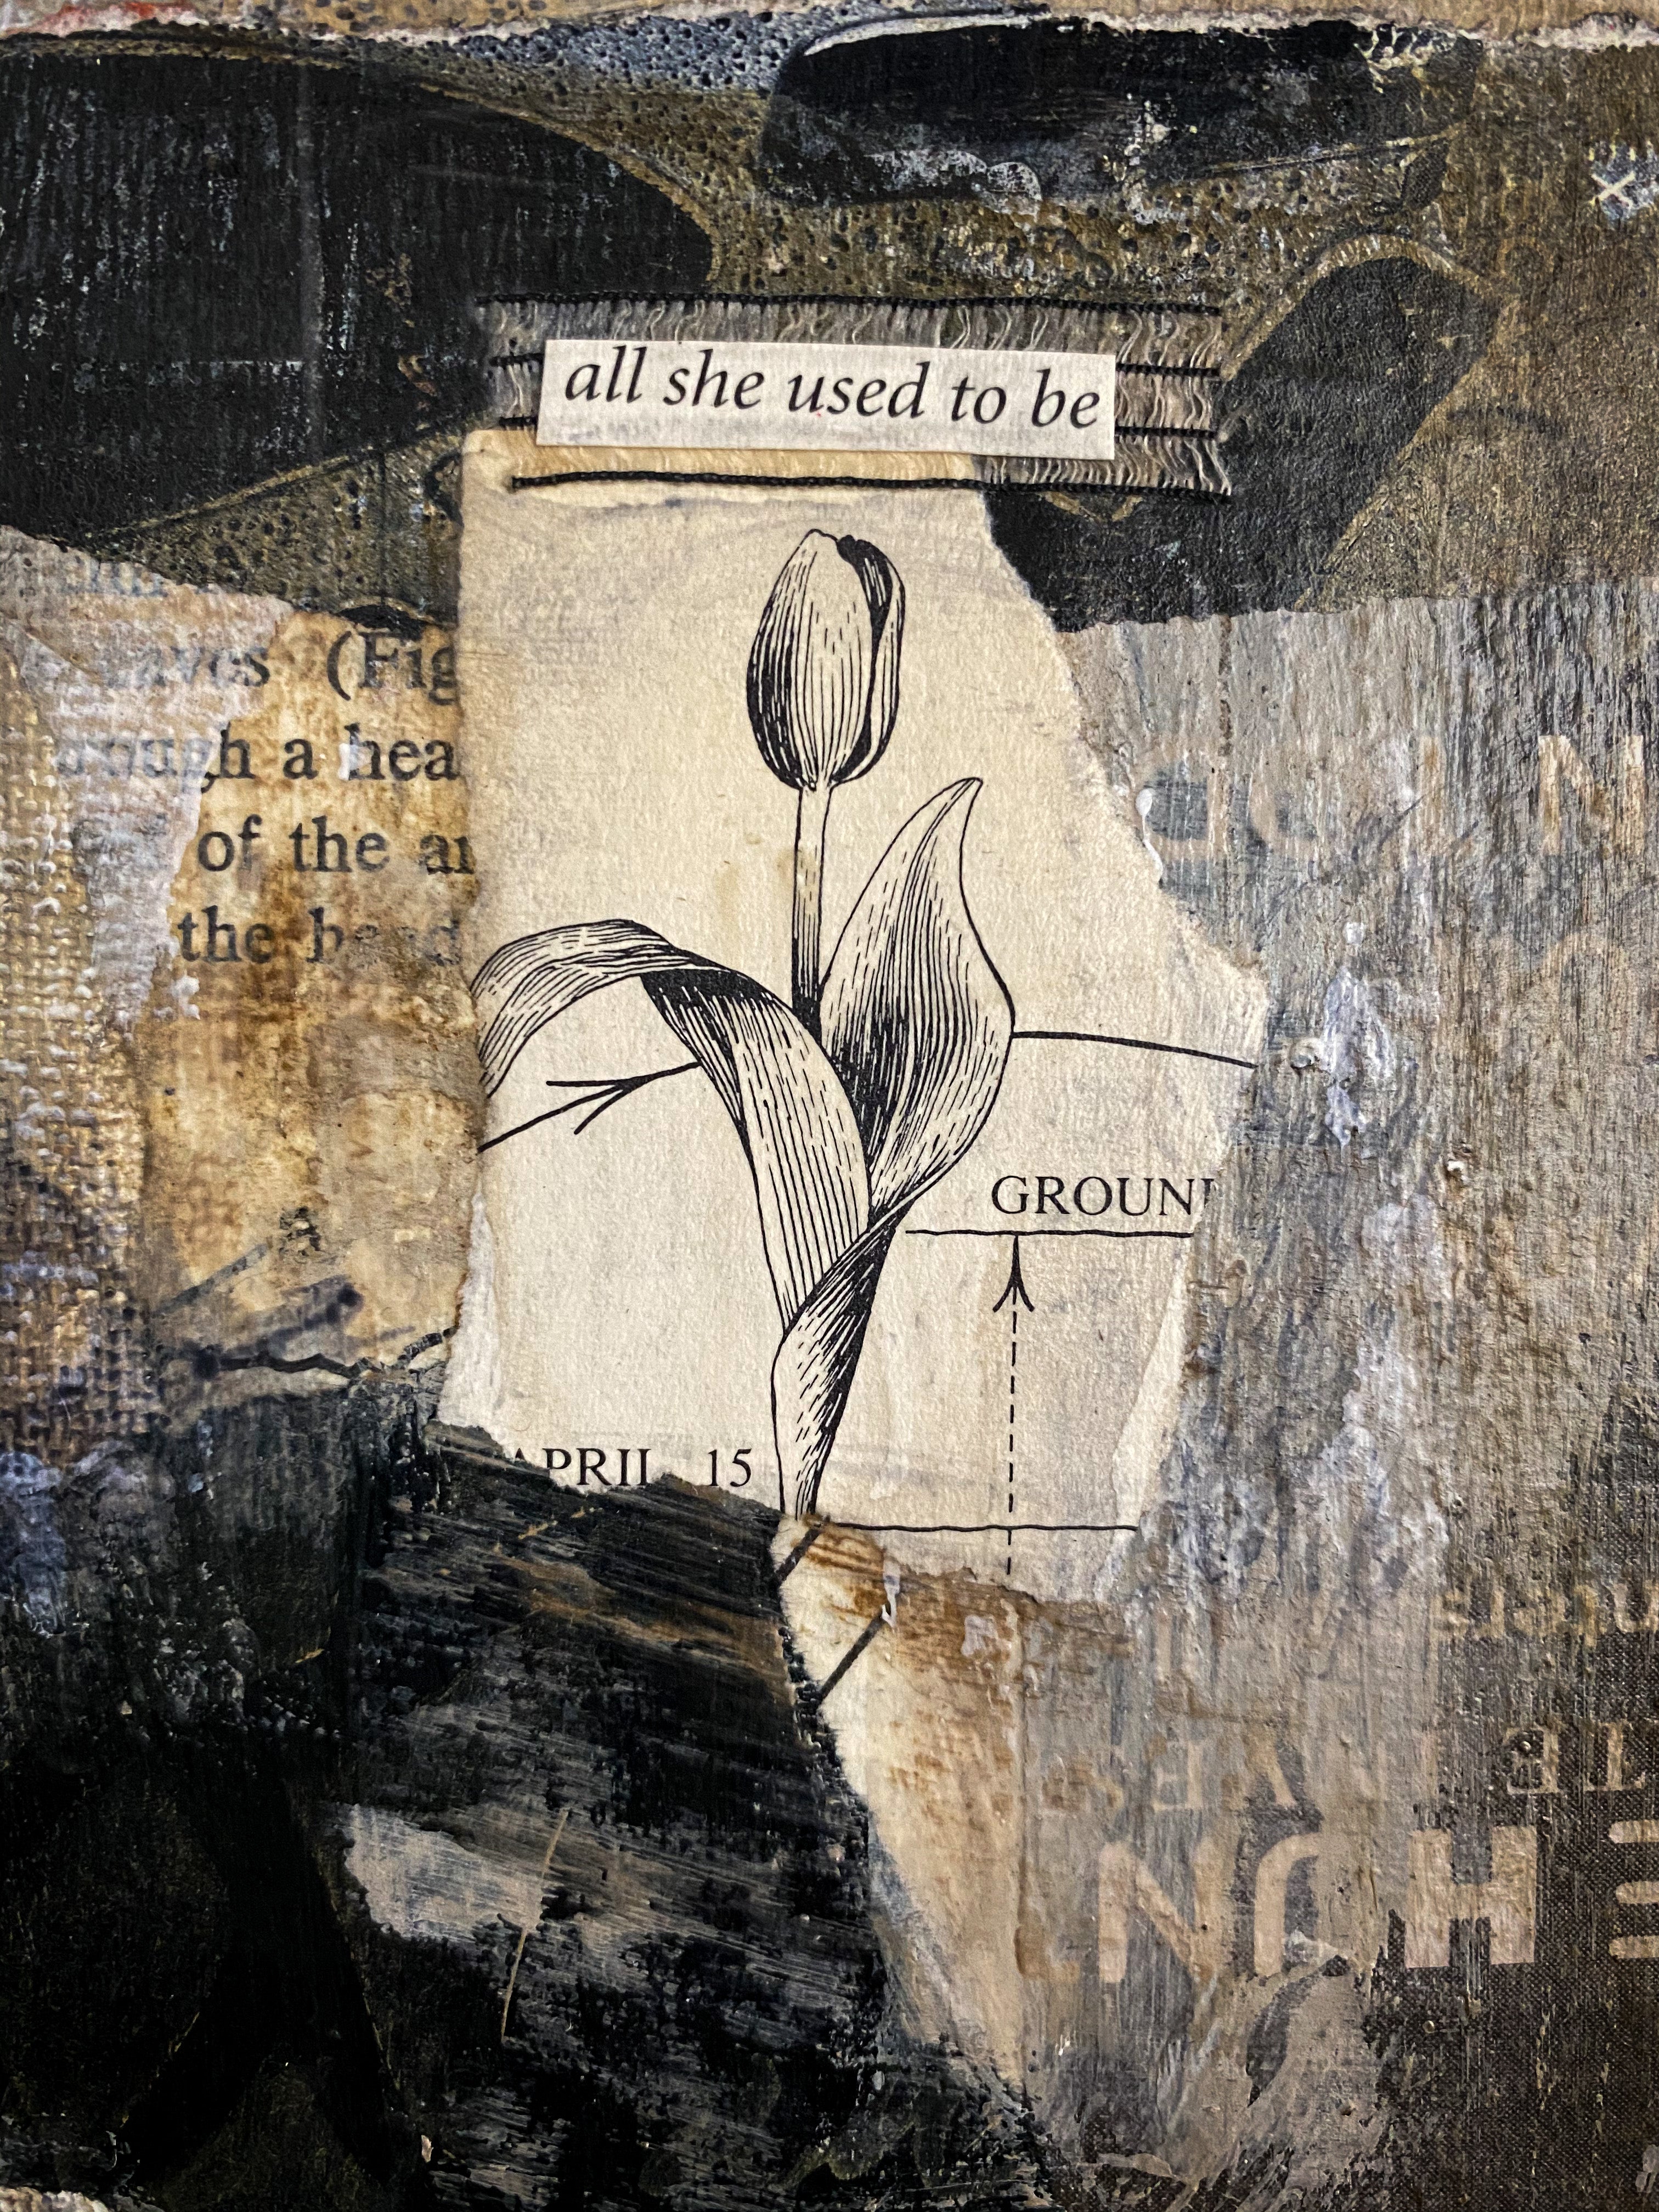 Used to Be - Original Mixed Media Collage